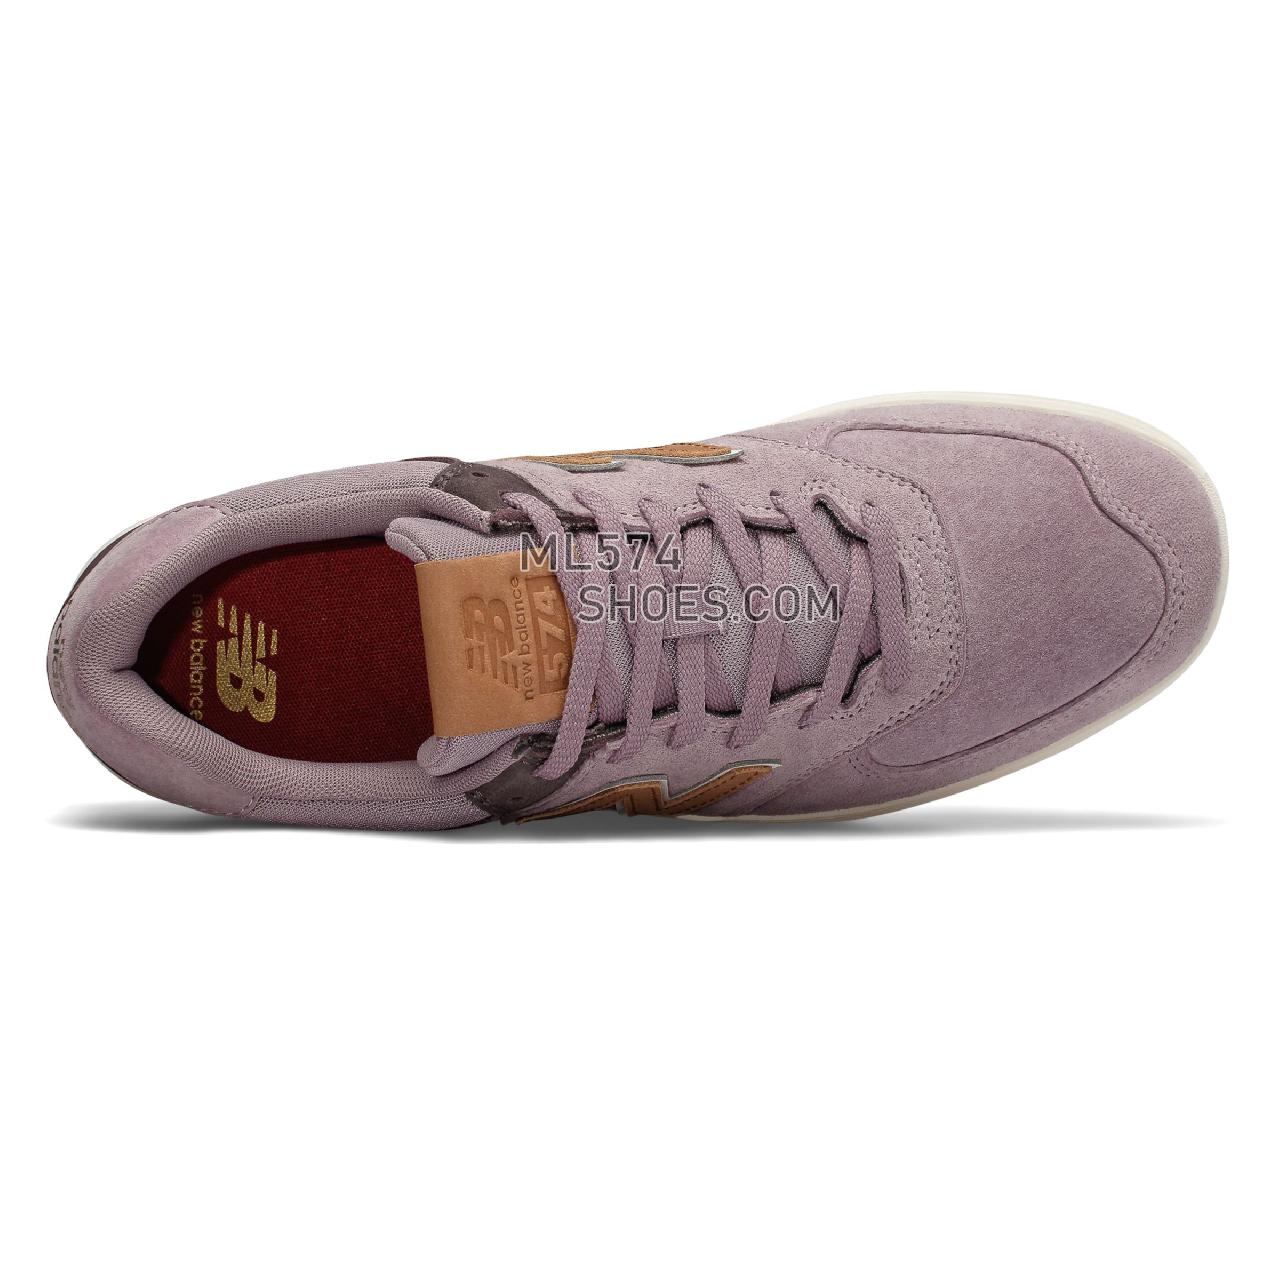 New Balance AM574 - Men's Court Classics - Rose with Tan - AM574CPR